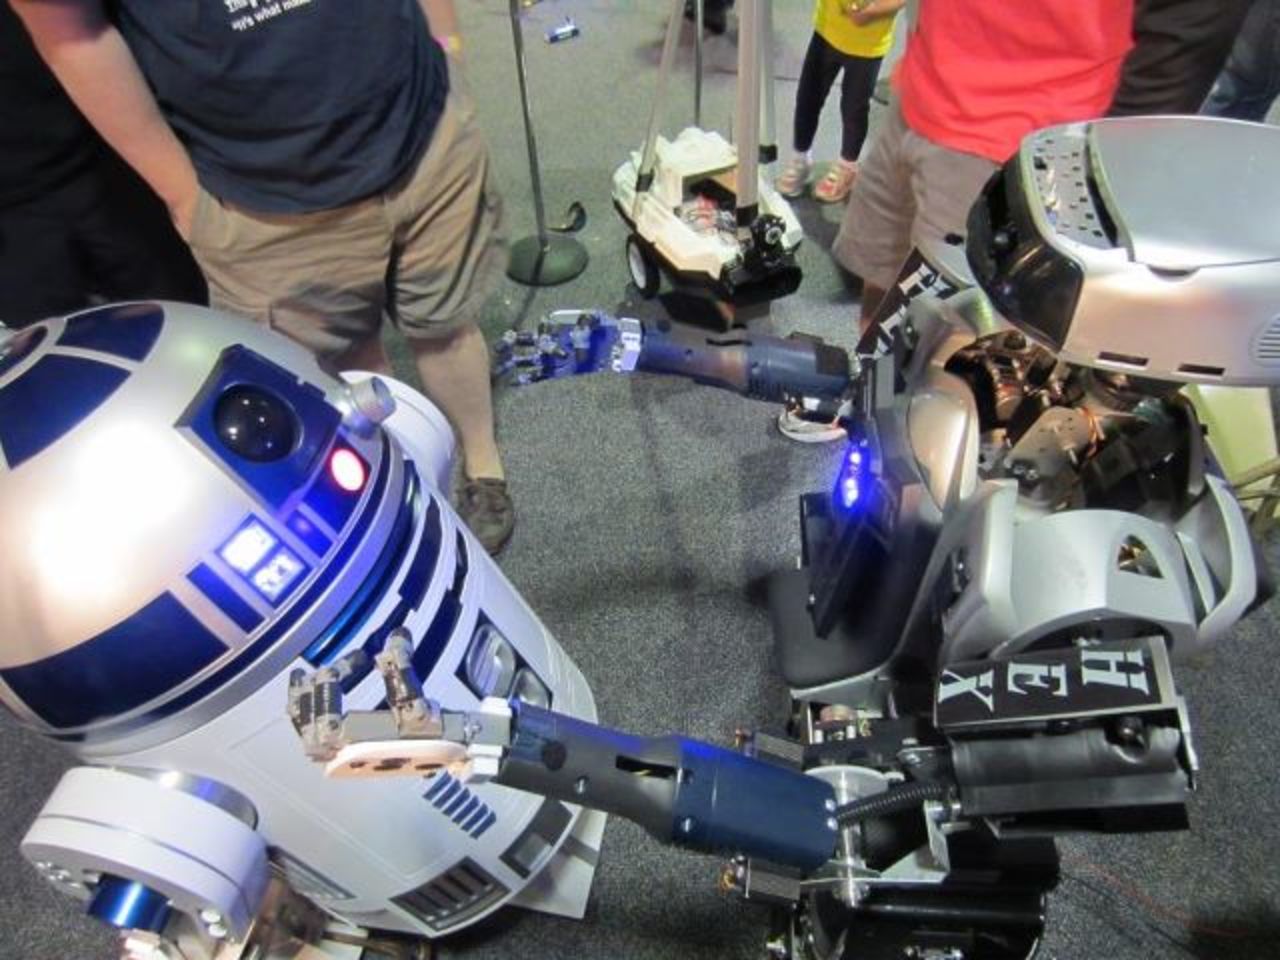 HEX meets "R2-D2" at a recent Robofest event. Haygood hopes to inspire kids in Baltimore to build robots. 